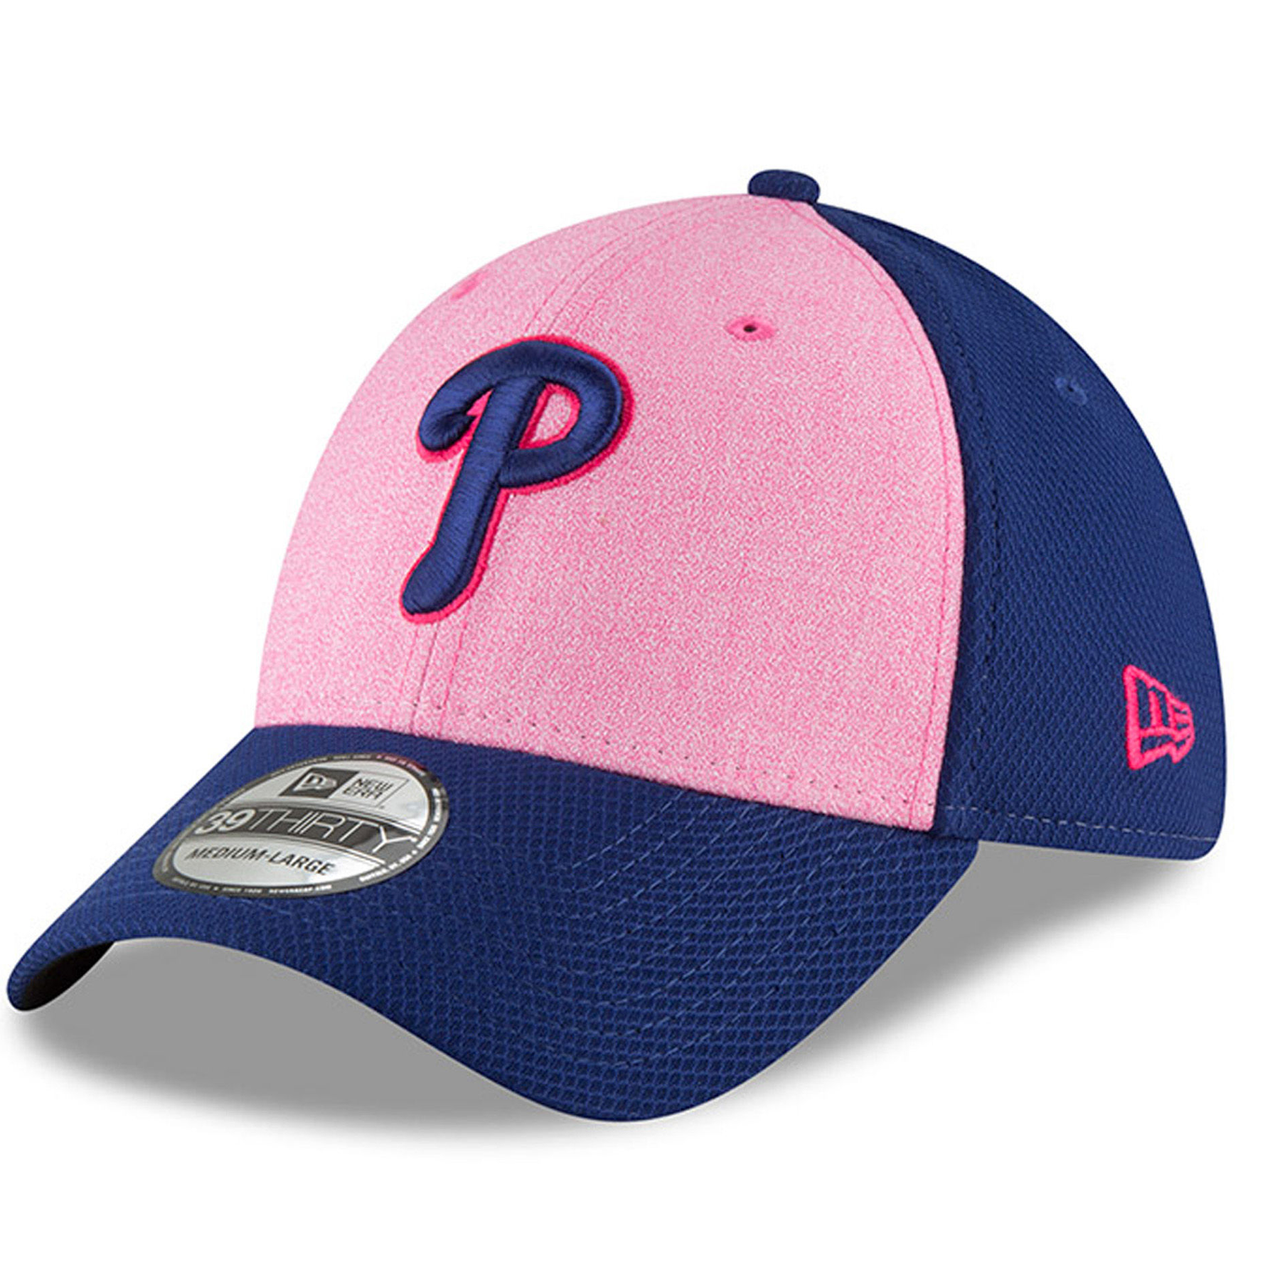 on the left side of the philadelphia phillies 39thirty 2018 mother's day stretch fit cap is the new era logo embroidered in hot pink